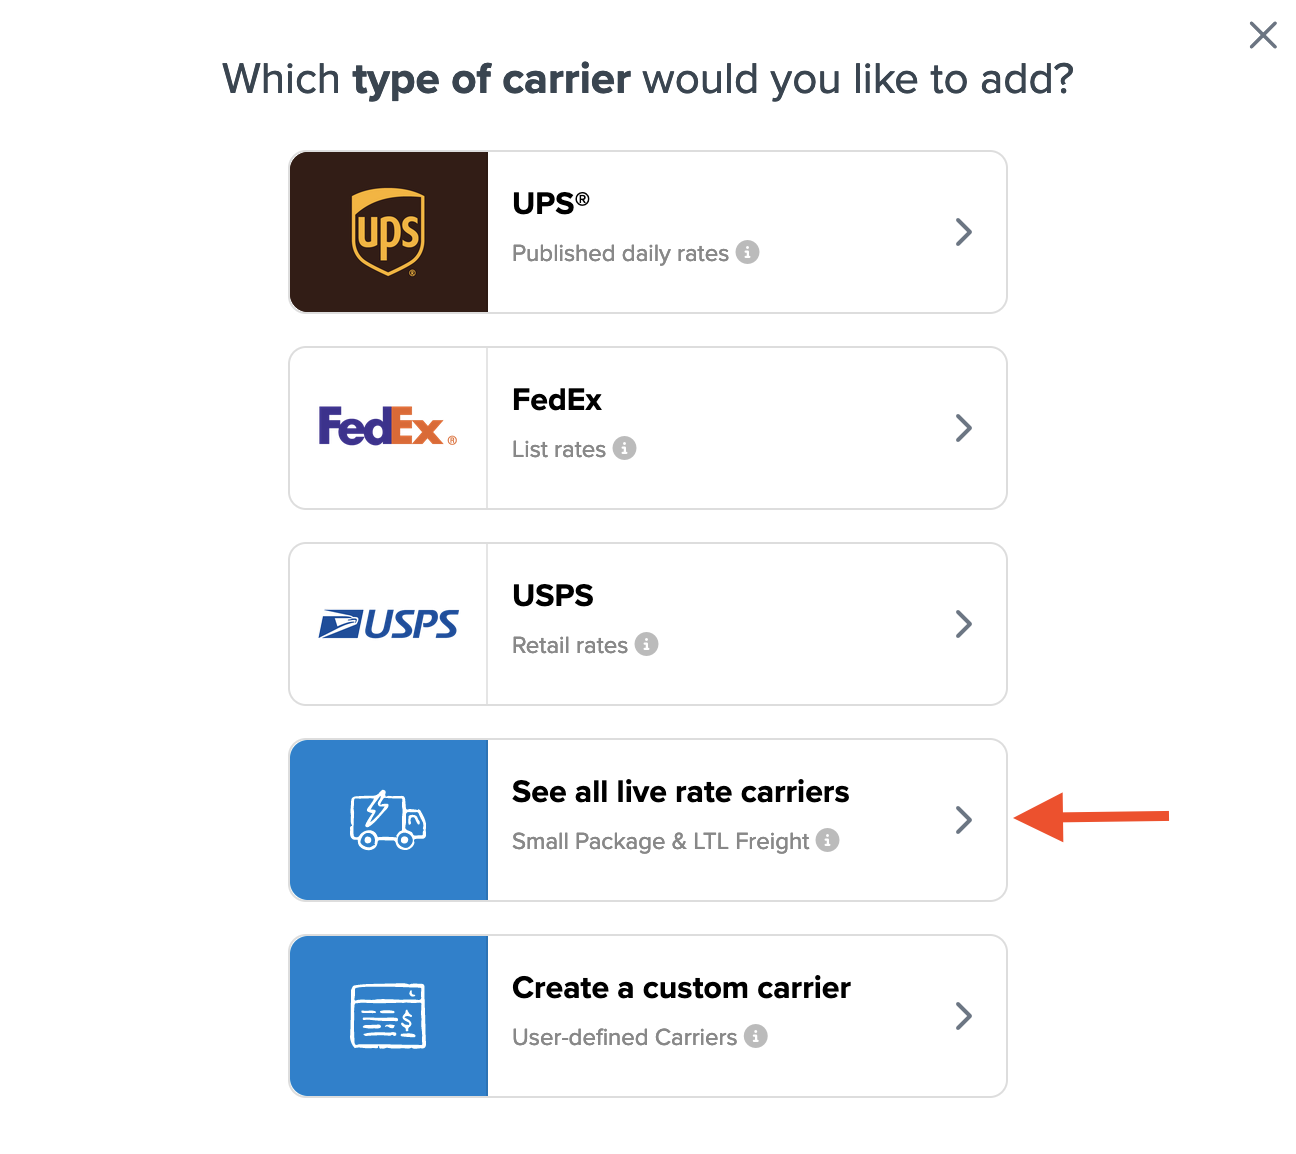 Search all live rate carriers